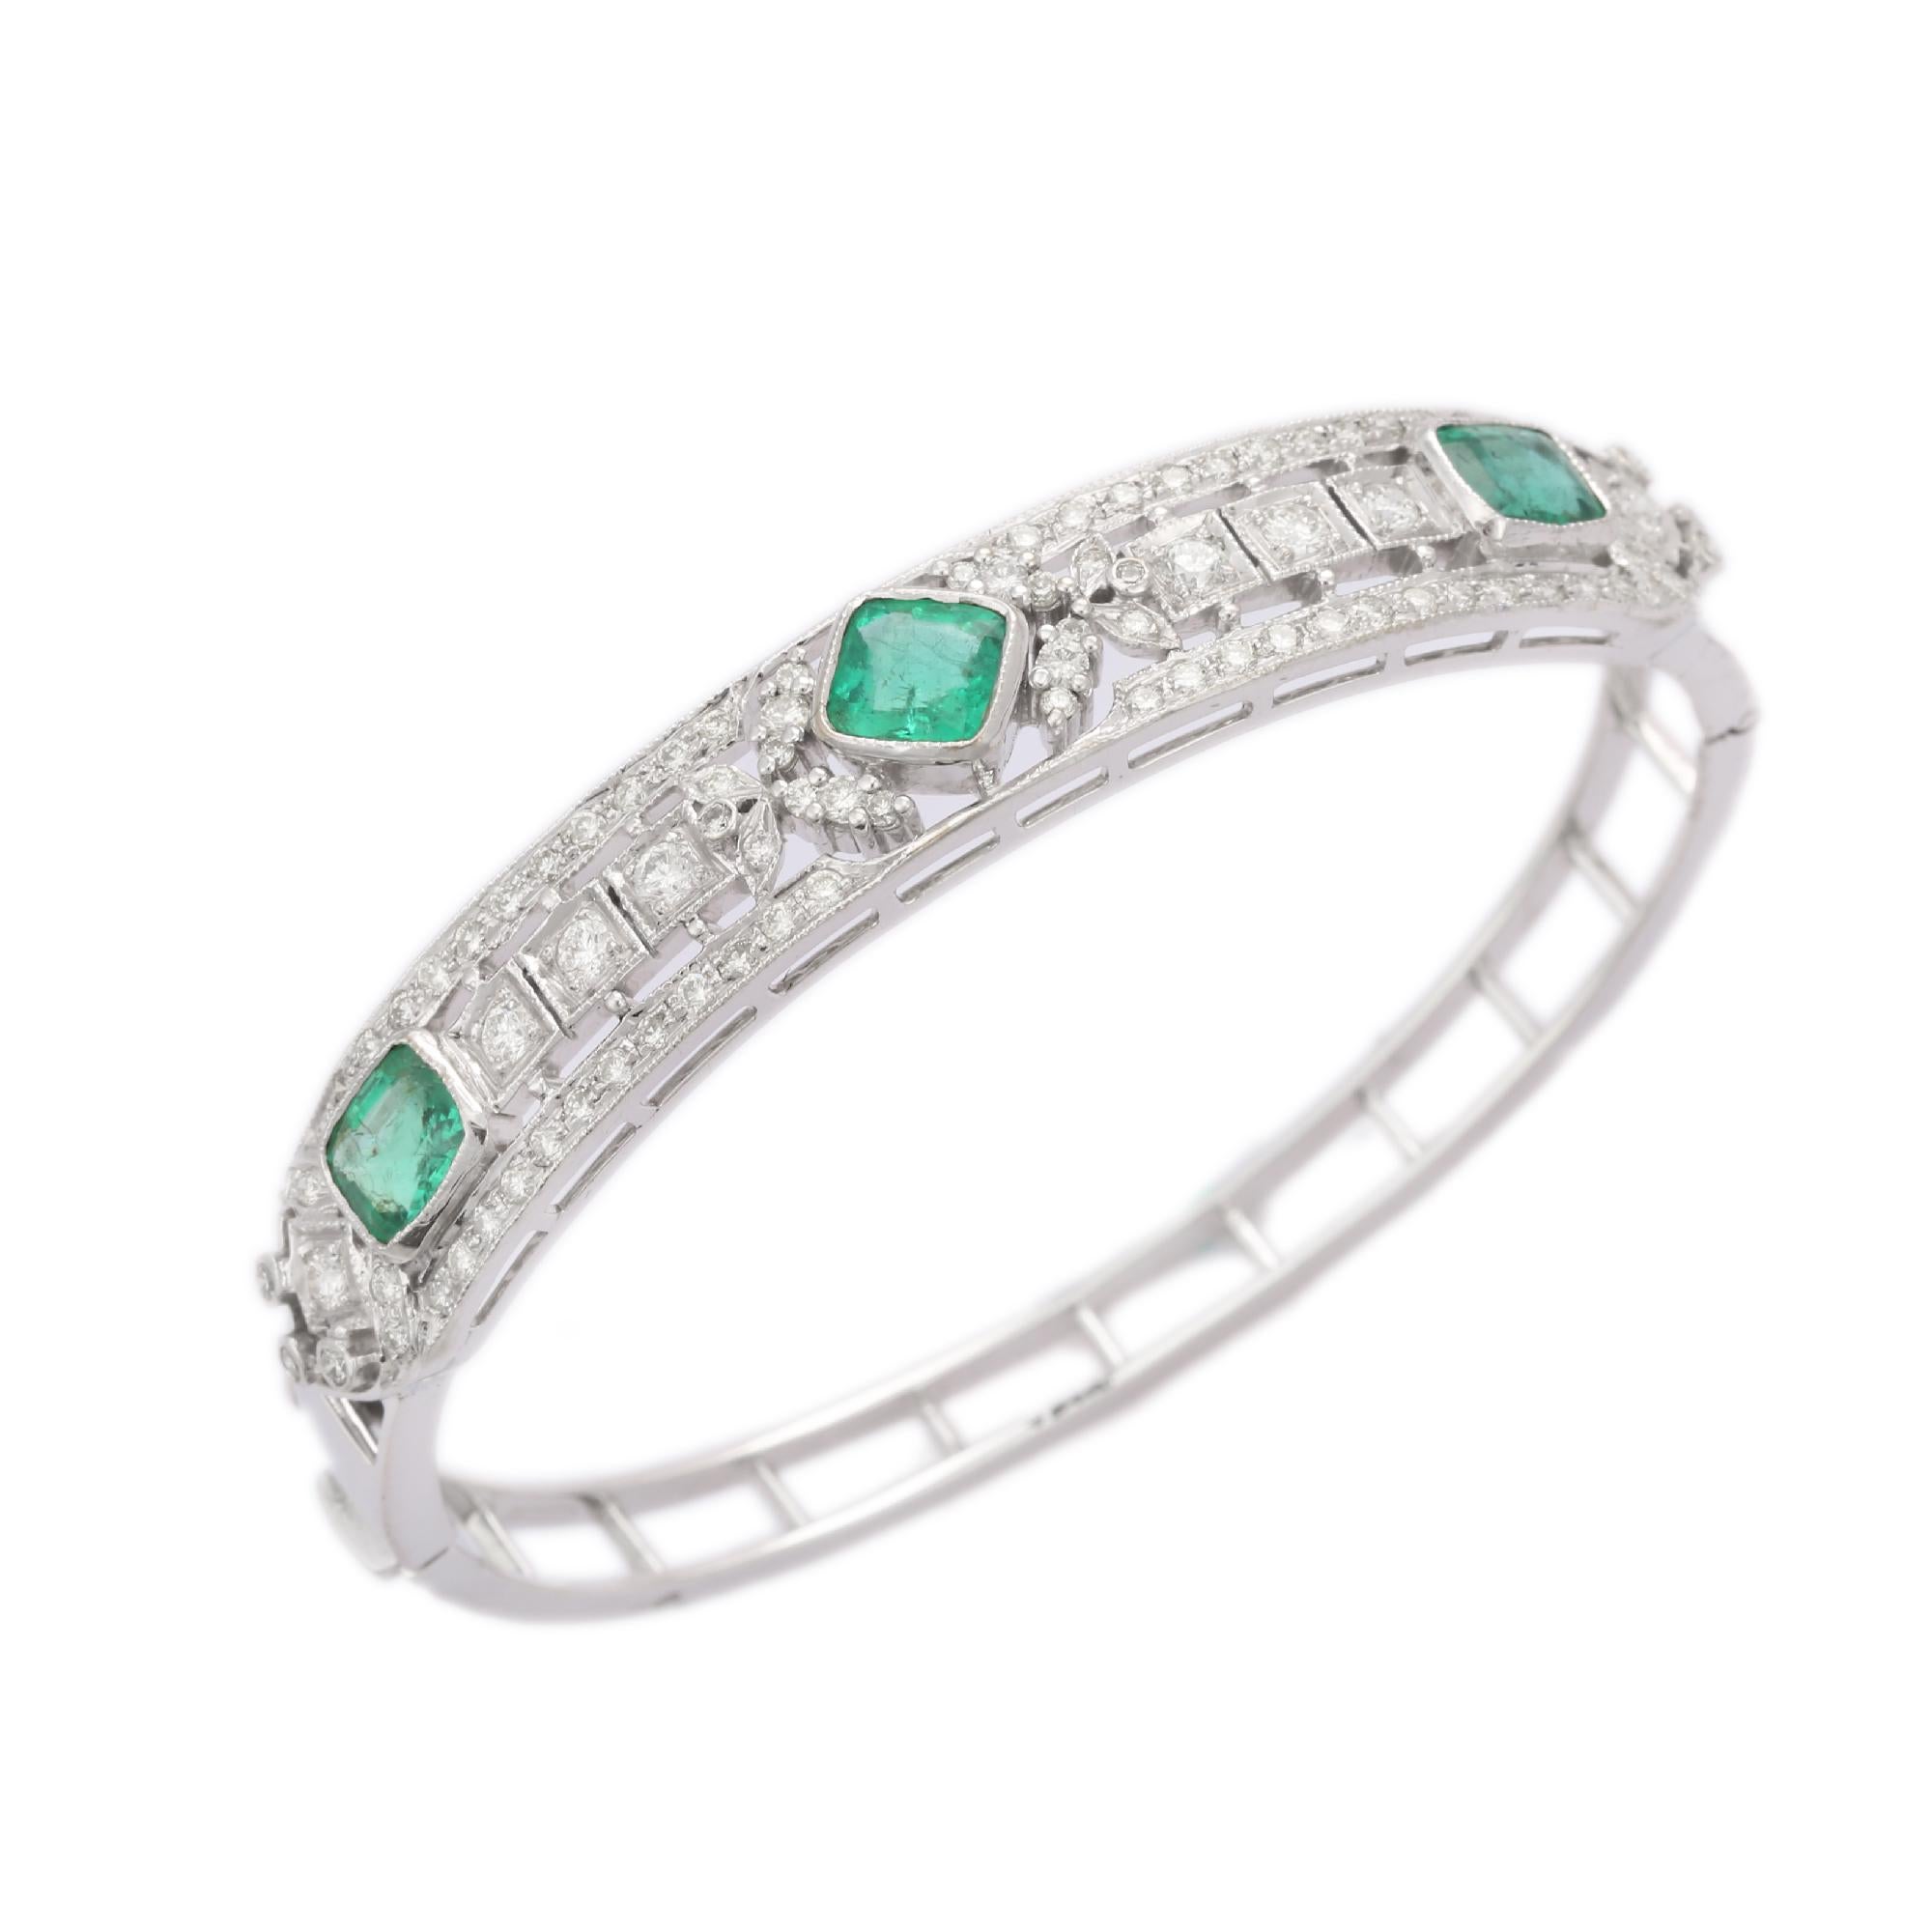 This Emerald Diamond Clamper Bracelet in 18K gold showcases 3 endlessly sparkling natural emeralds, weighing 3.33 carat and  diamonds weighing 1.43 carat. It measures 65 mm in length and 53 mm in width.
Emerald enhances the intellectual capacity of